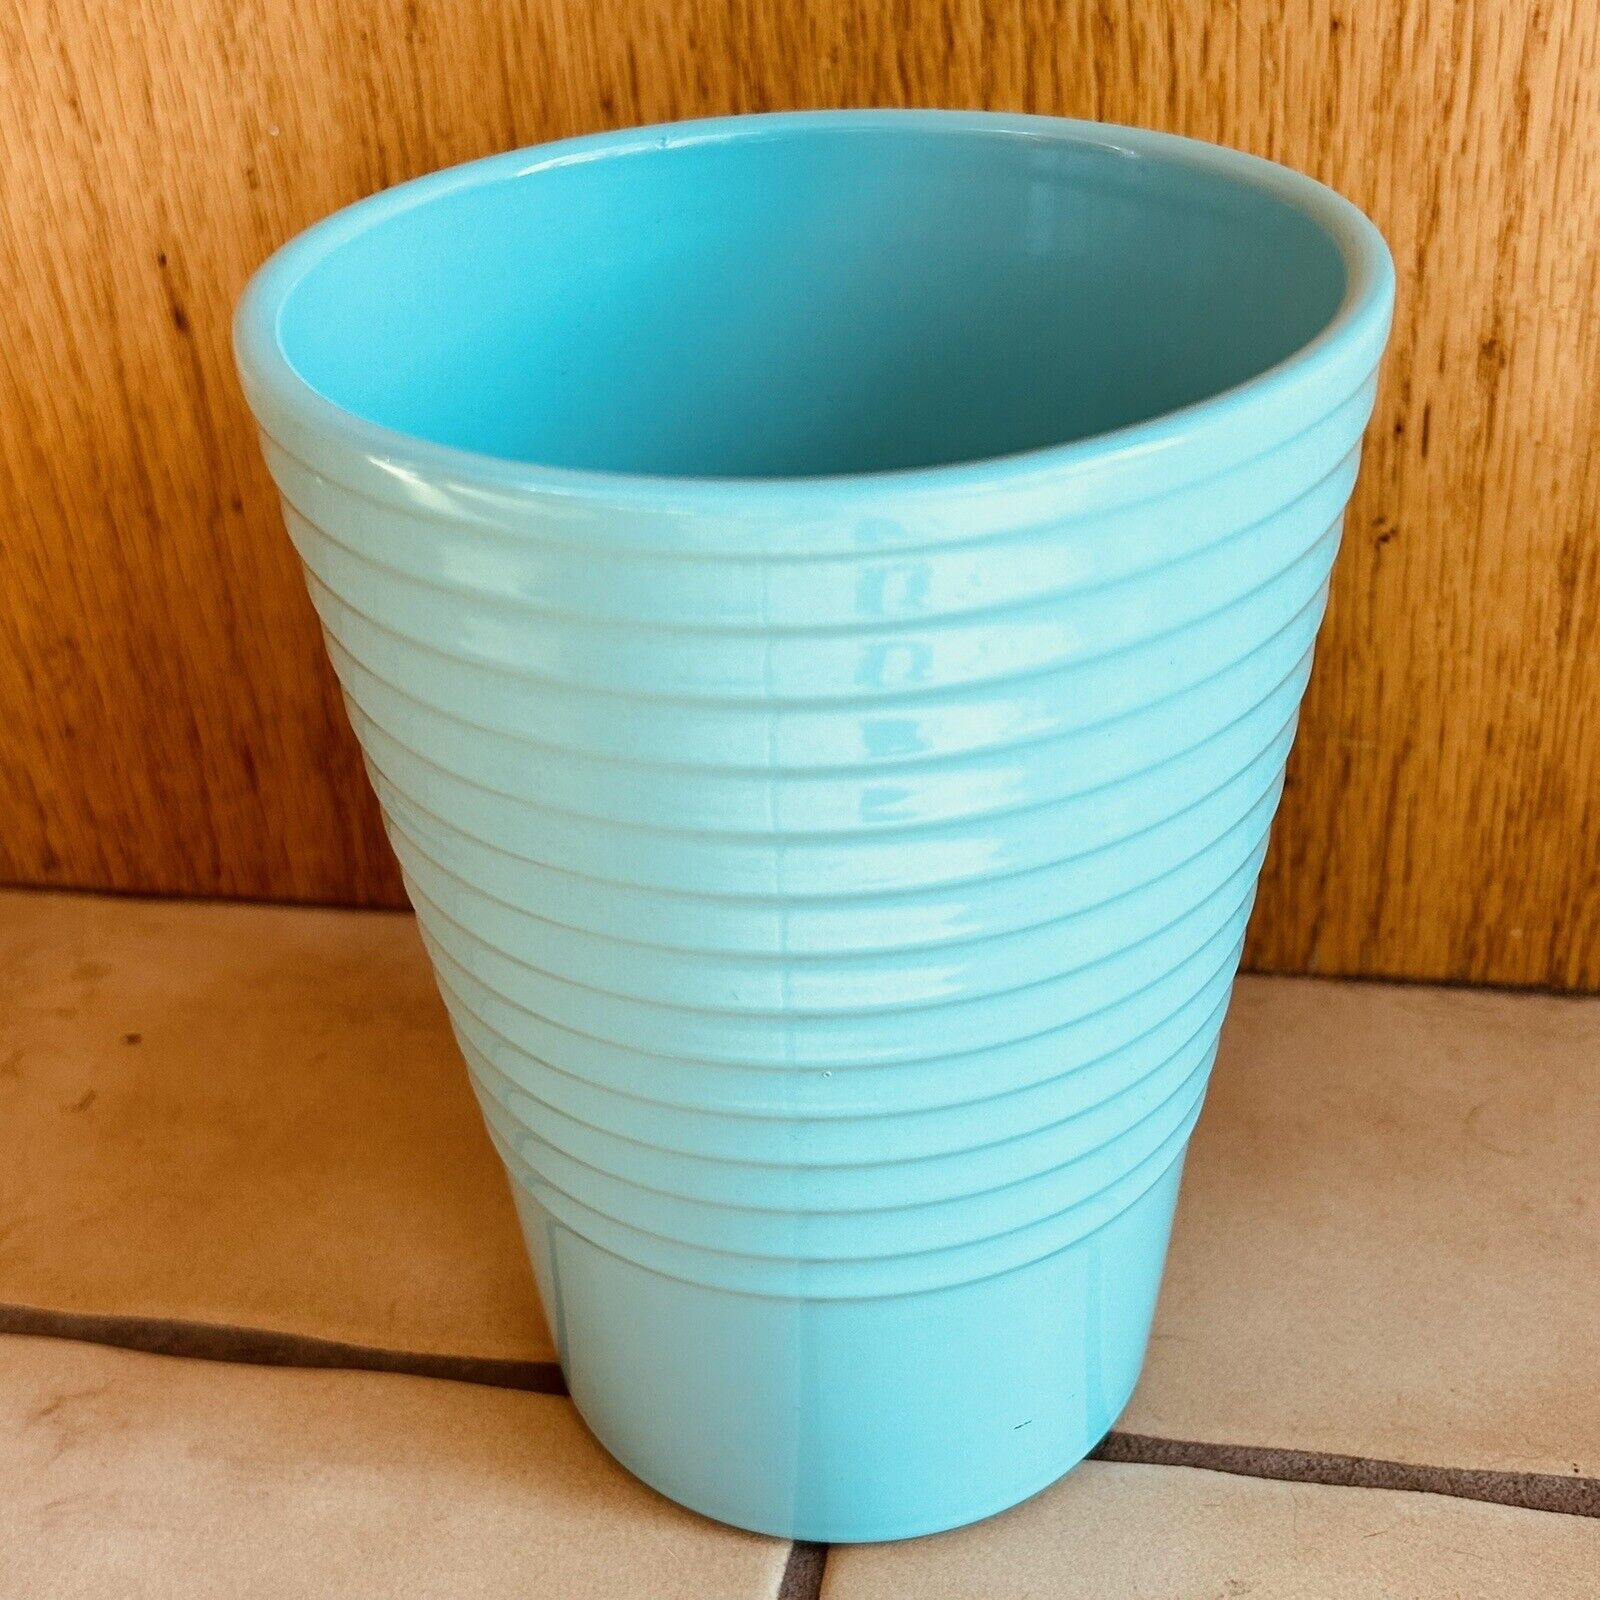 Gorgeous Ribbed Turquoise Ceramic Vase Flower Pot. Made in Germany 6.5\